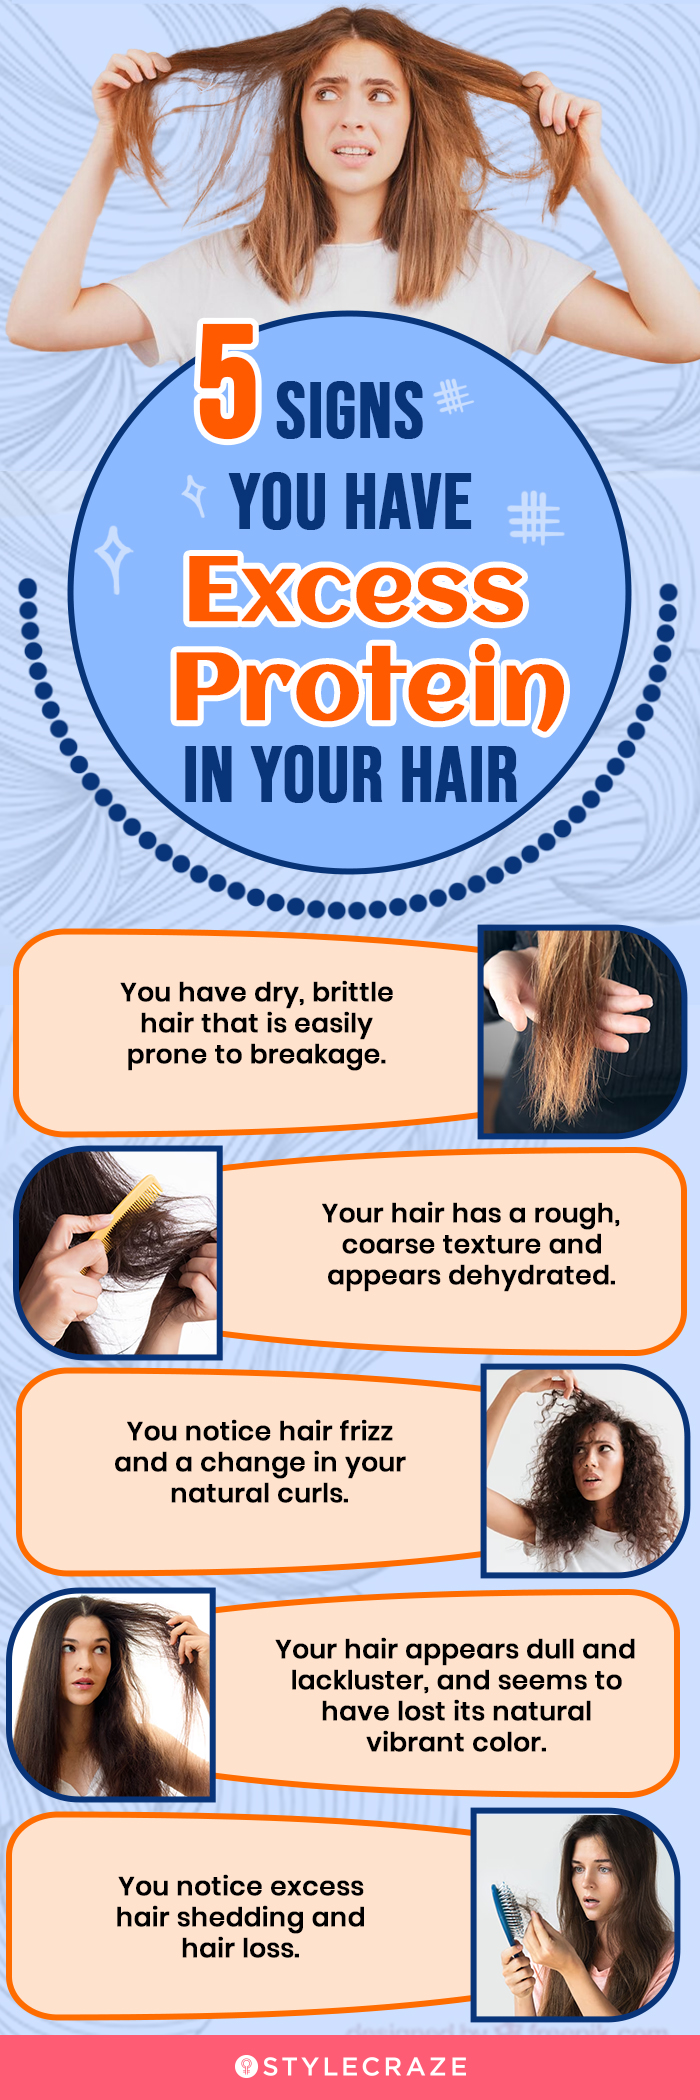 5 signs you have excess protein in your hair(infographic)